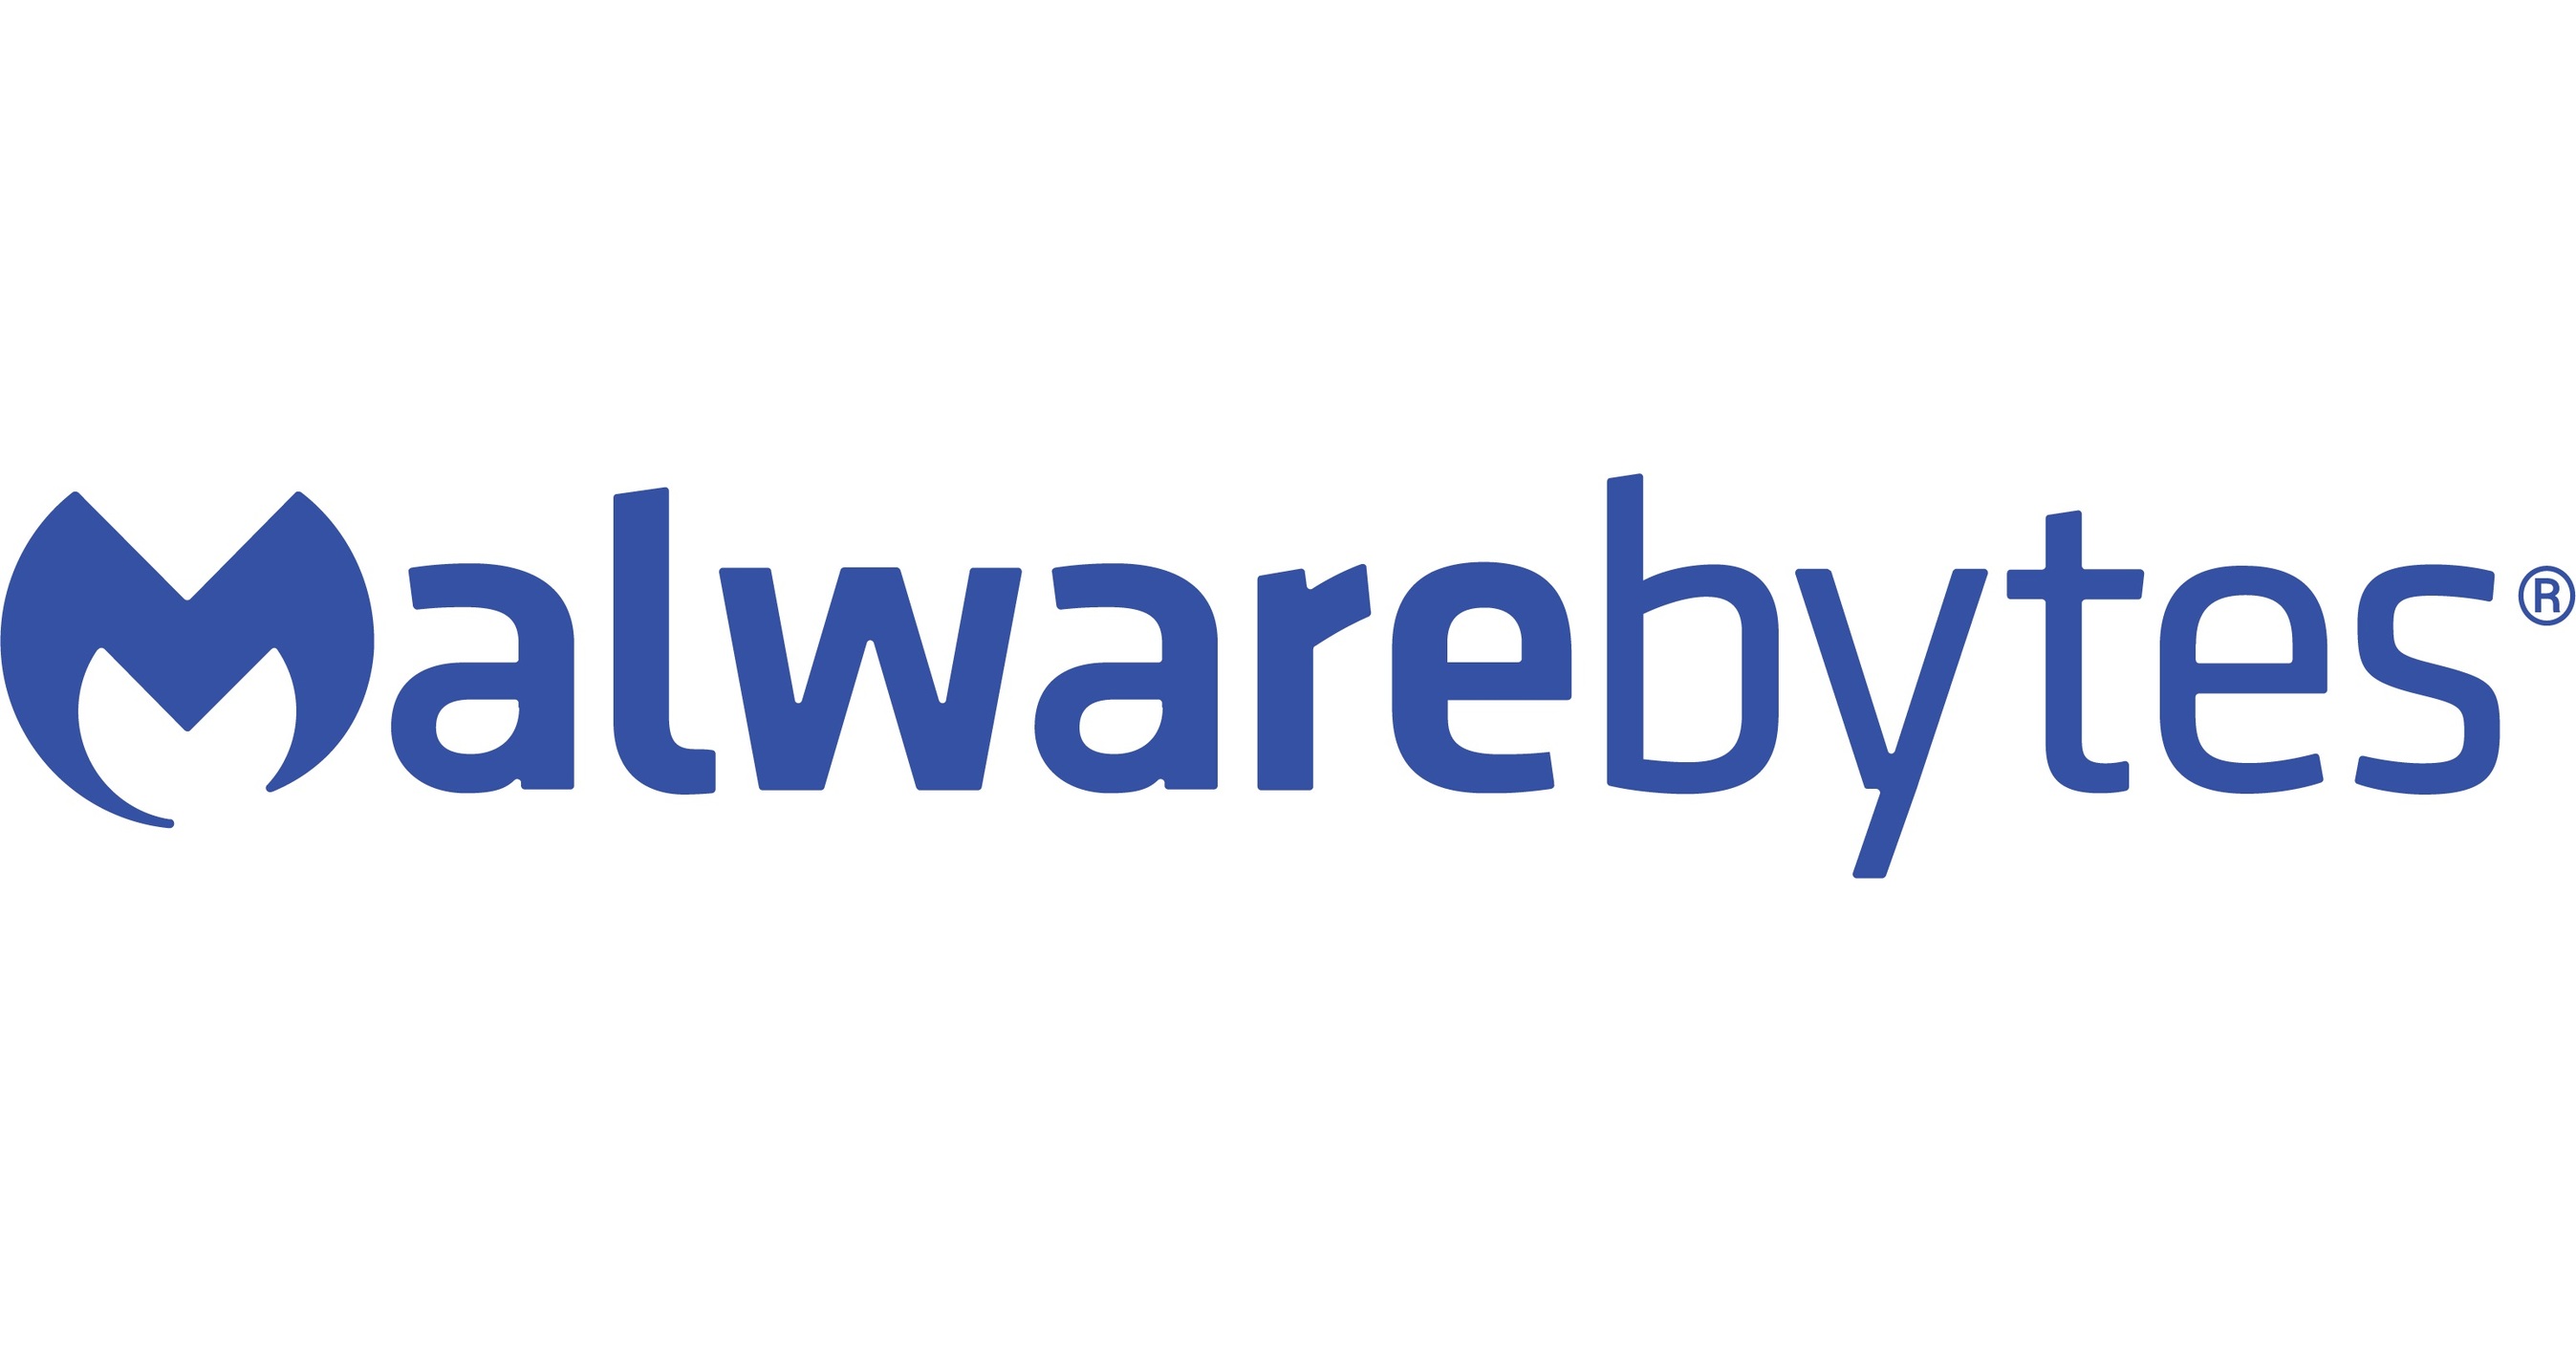 Malwarebytes Signals 'Channel-first' Ethos in EMEA and APAC with Programme and Product Enhancements